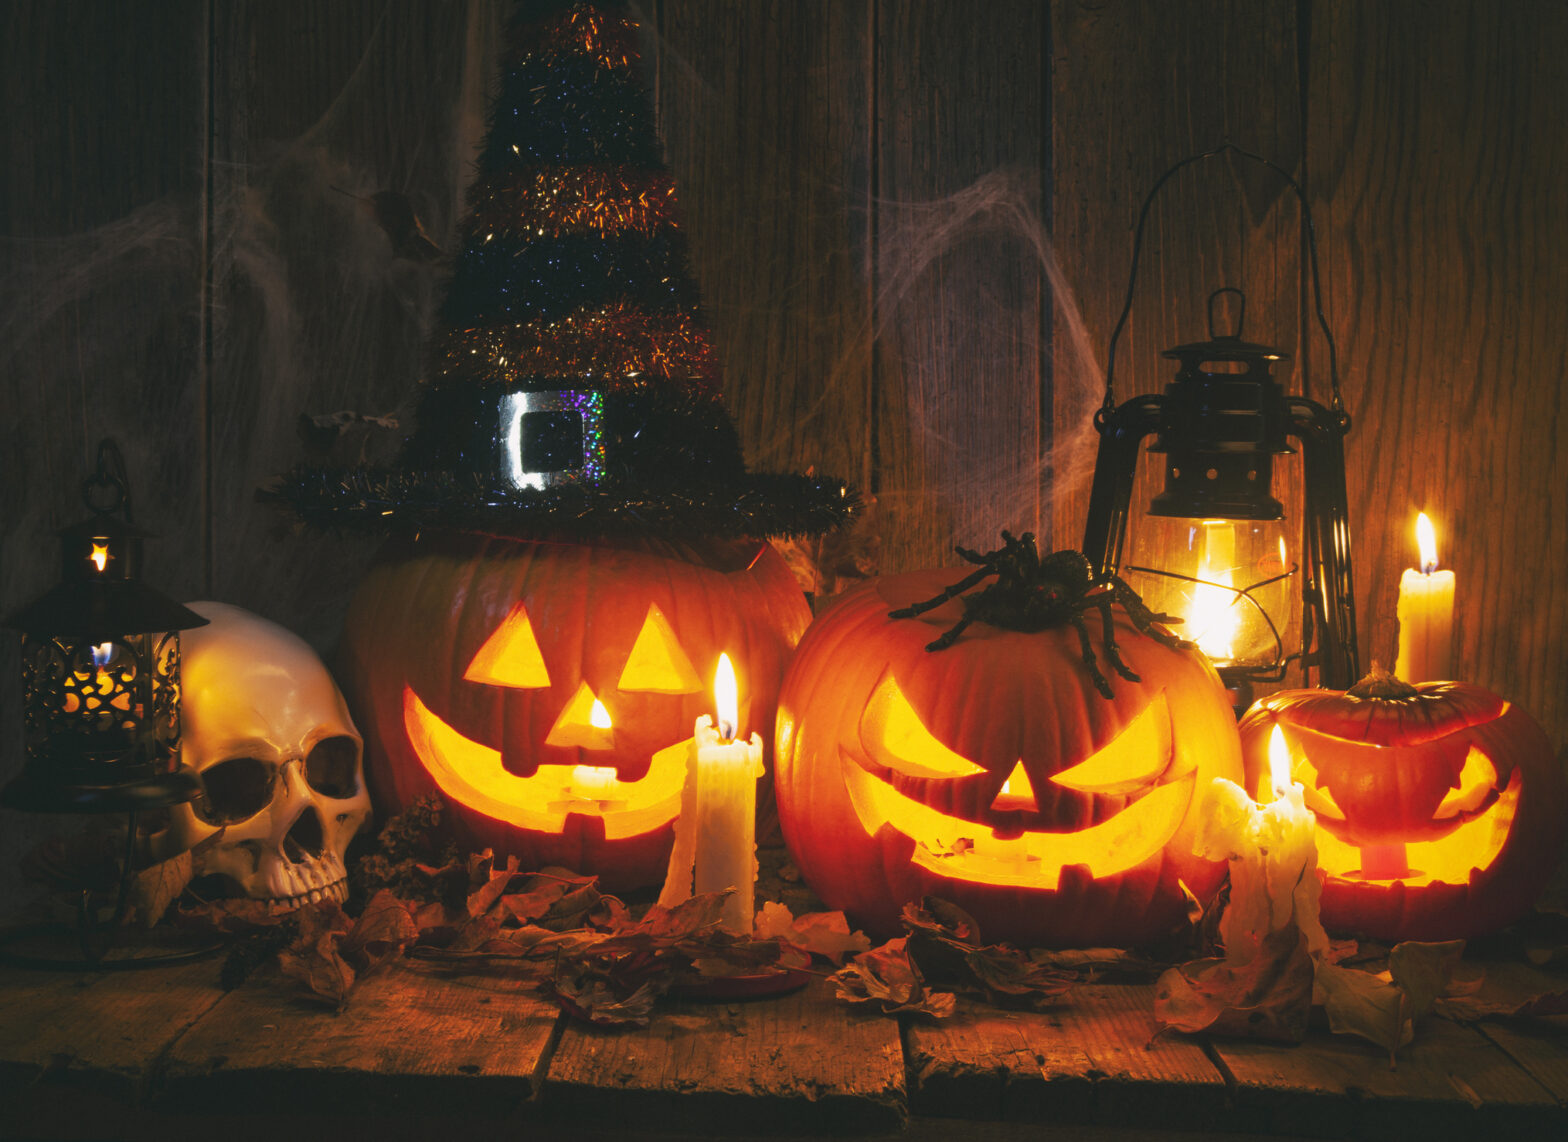 Haunted Cultural Events to Check Out This Harvest Season